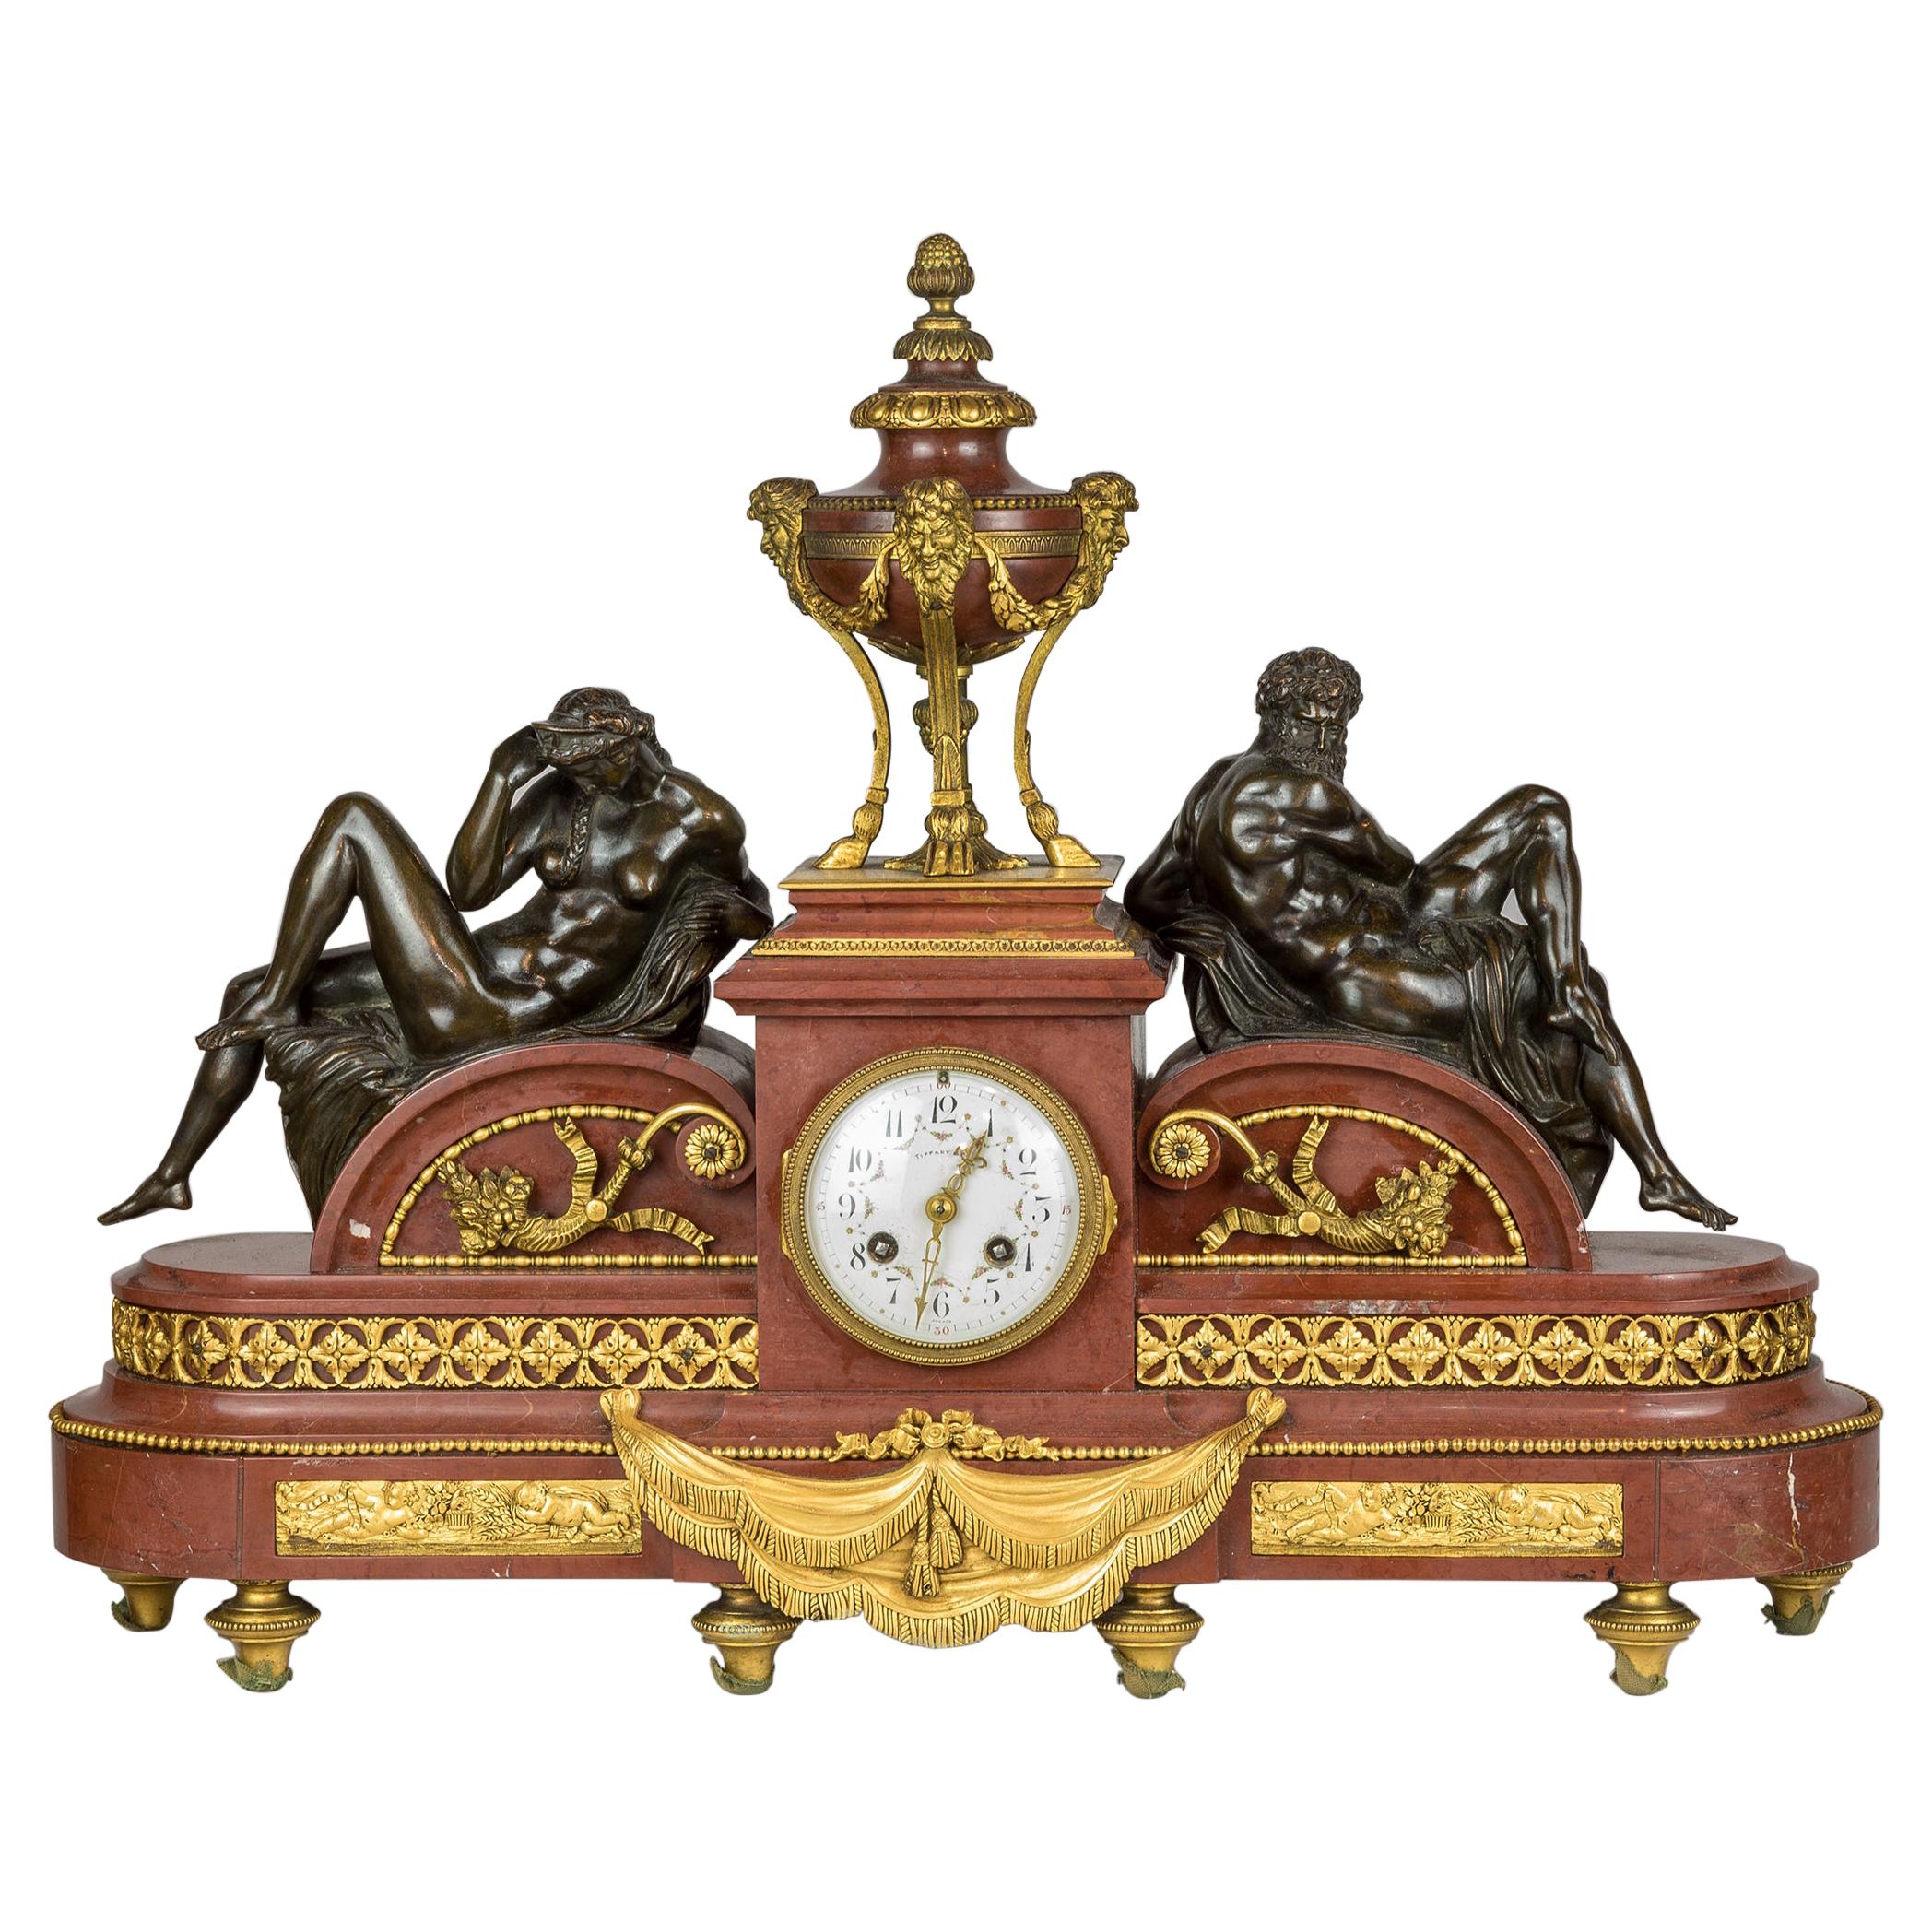 Tiffany & Co. Gilt Bronze and Rouge Marble Mantel Clock